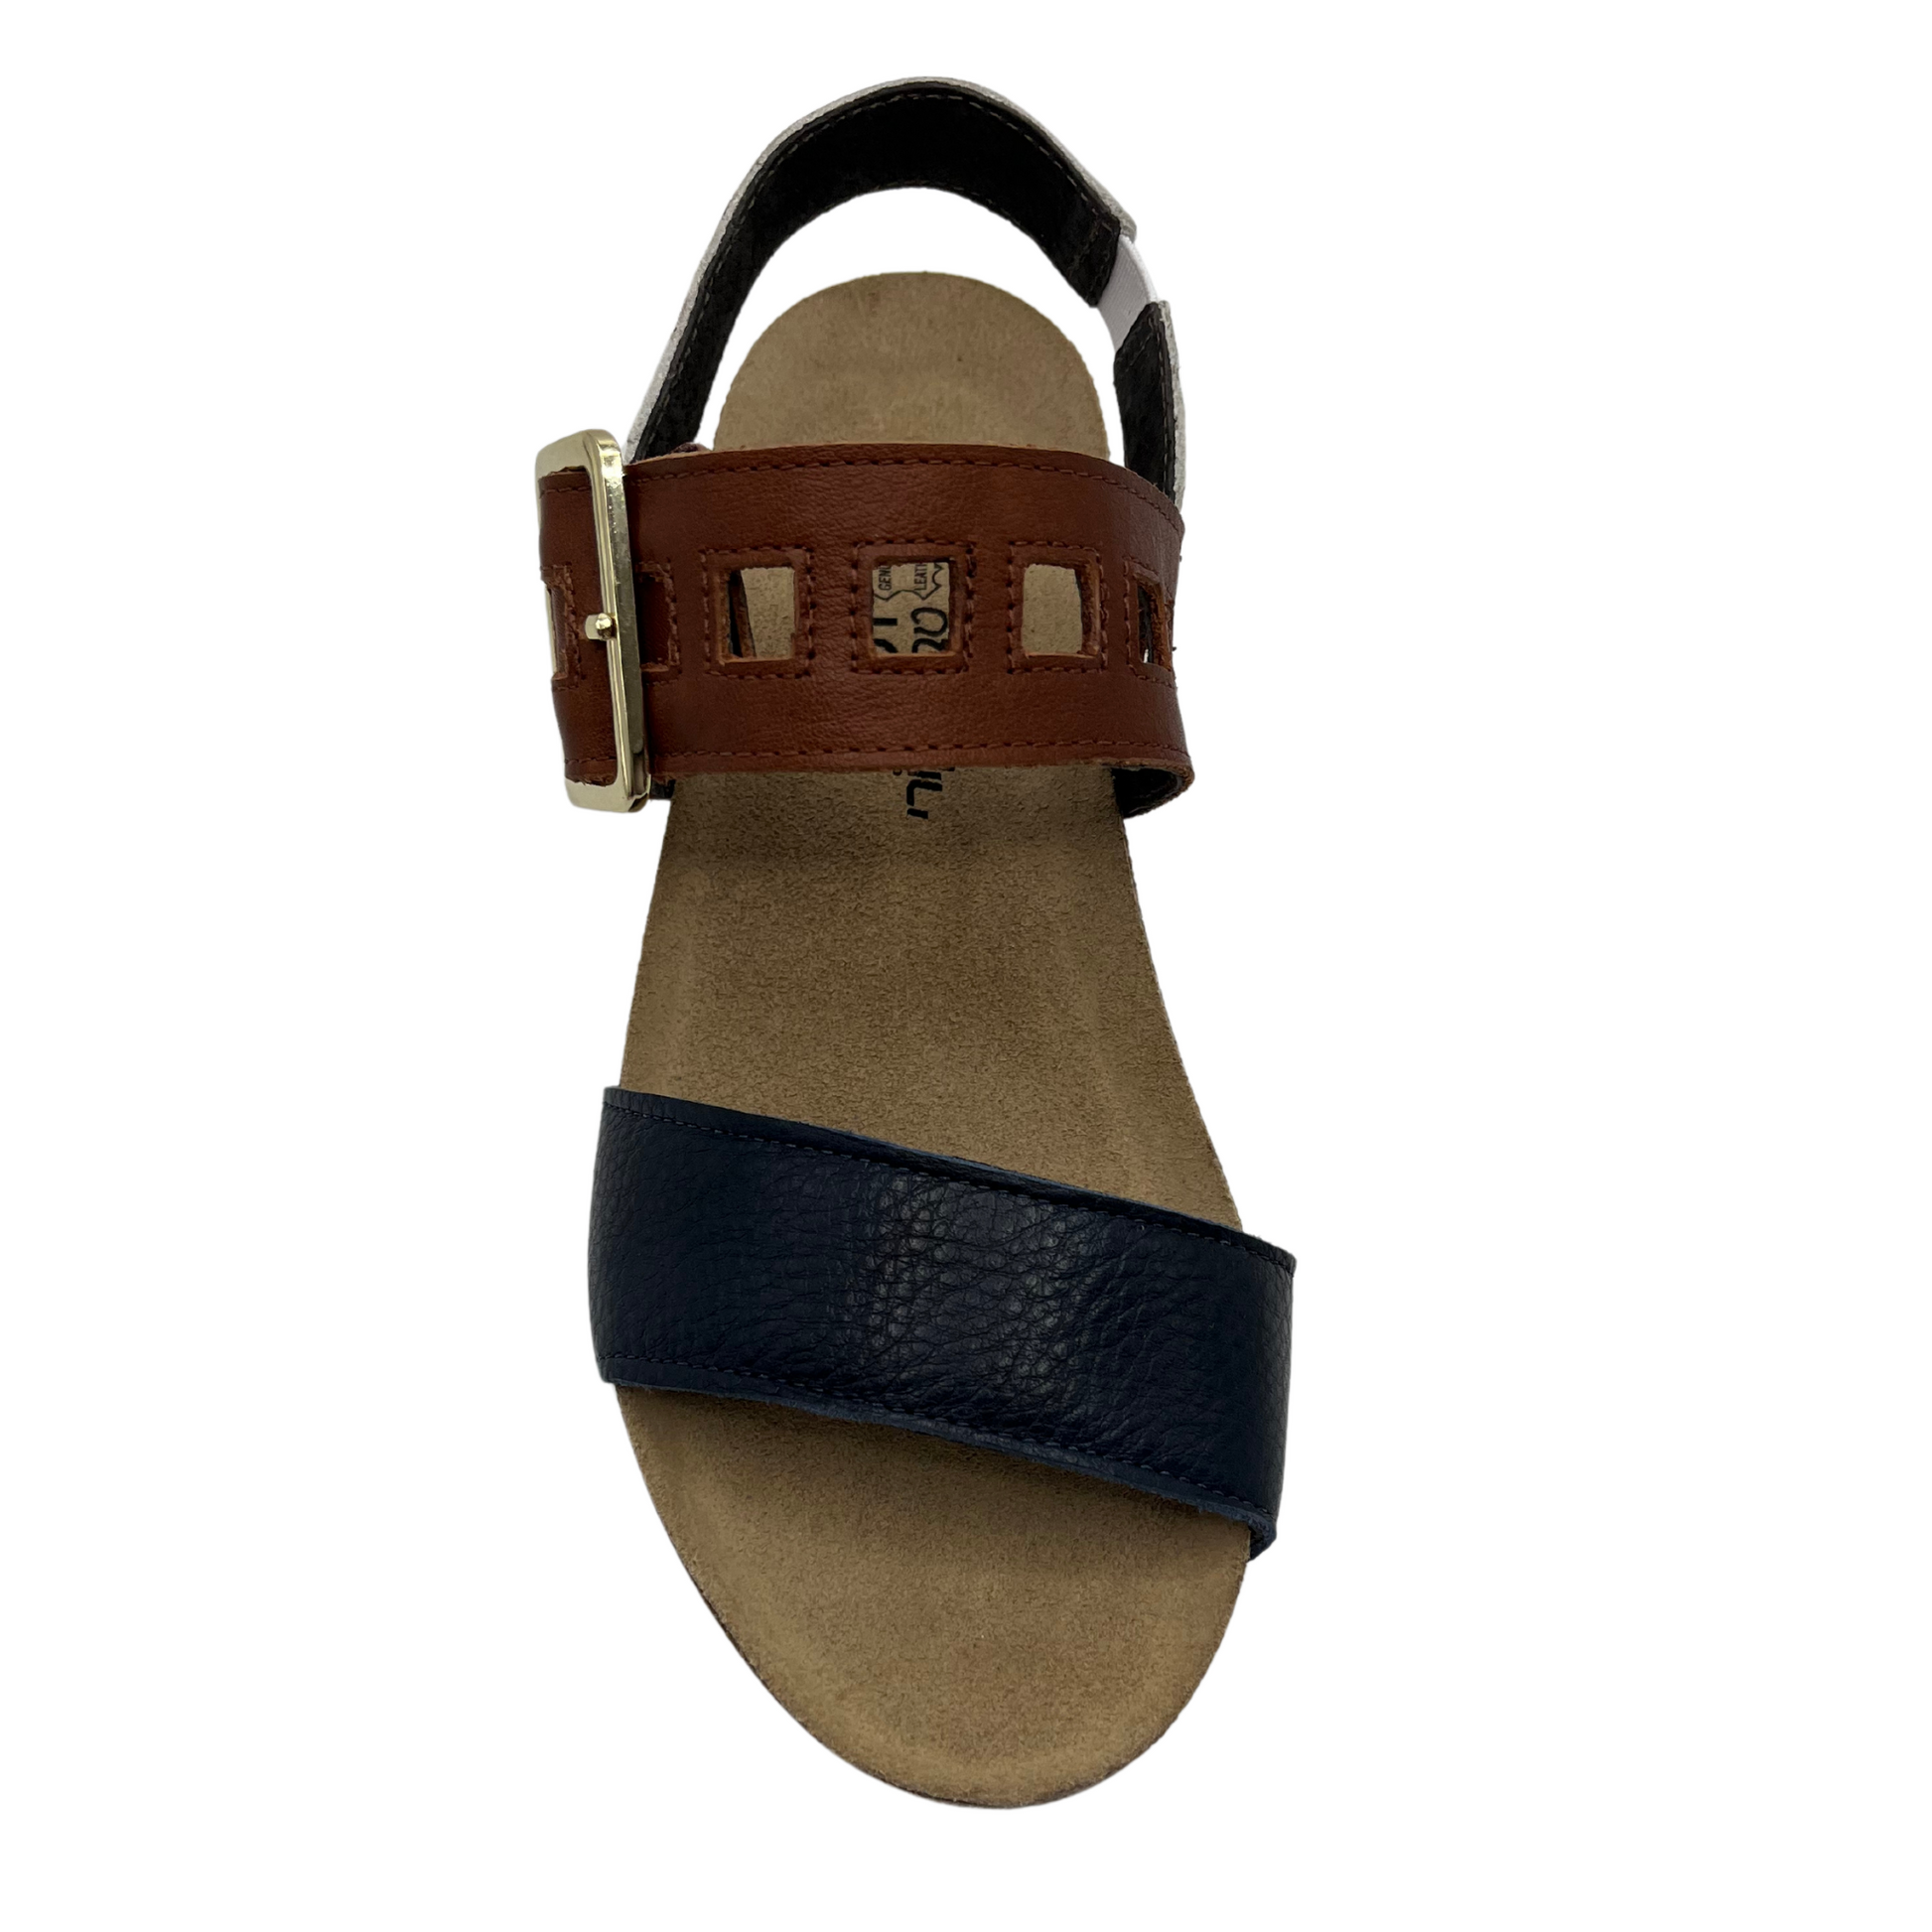 Top view of leather sandal with a large buckle strap with low wedge heel